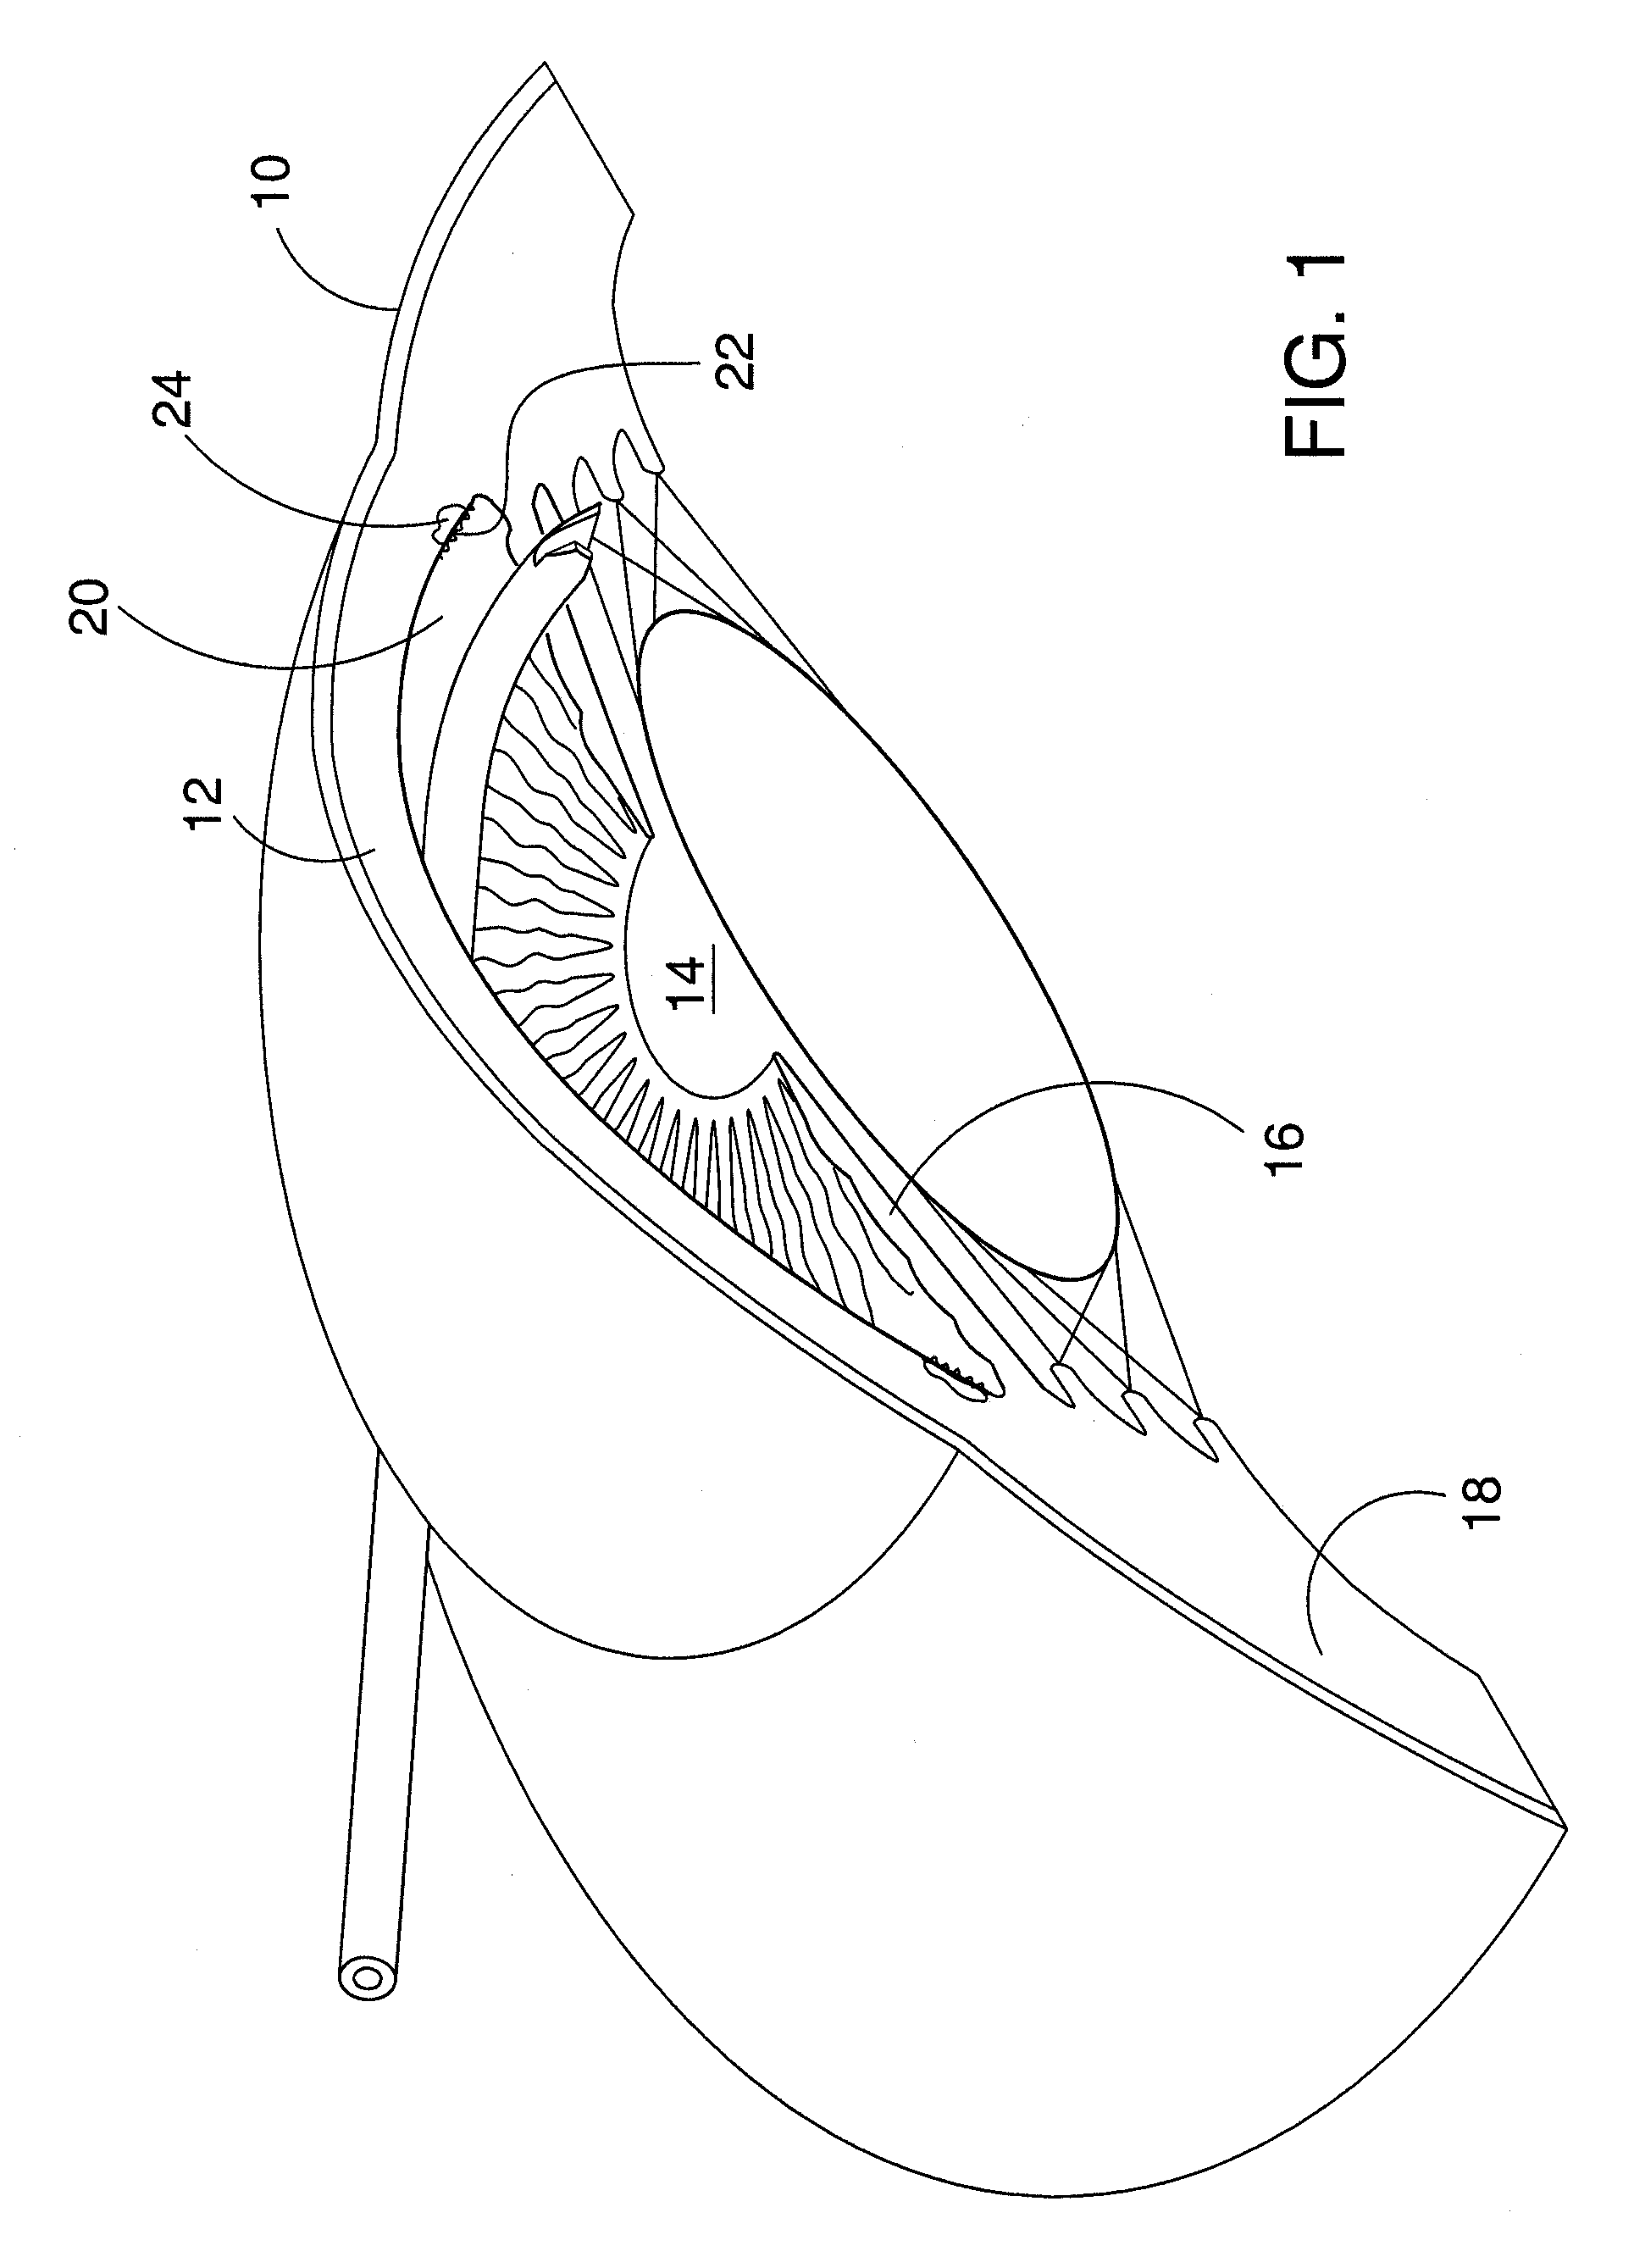 Ocular implant delivery system and method